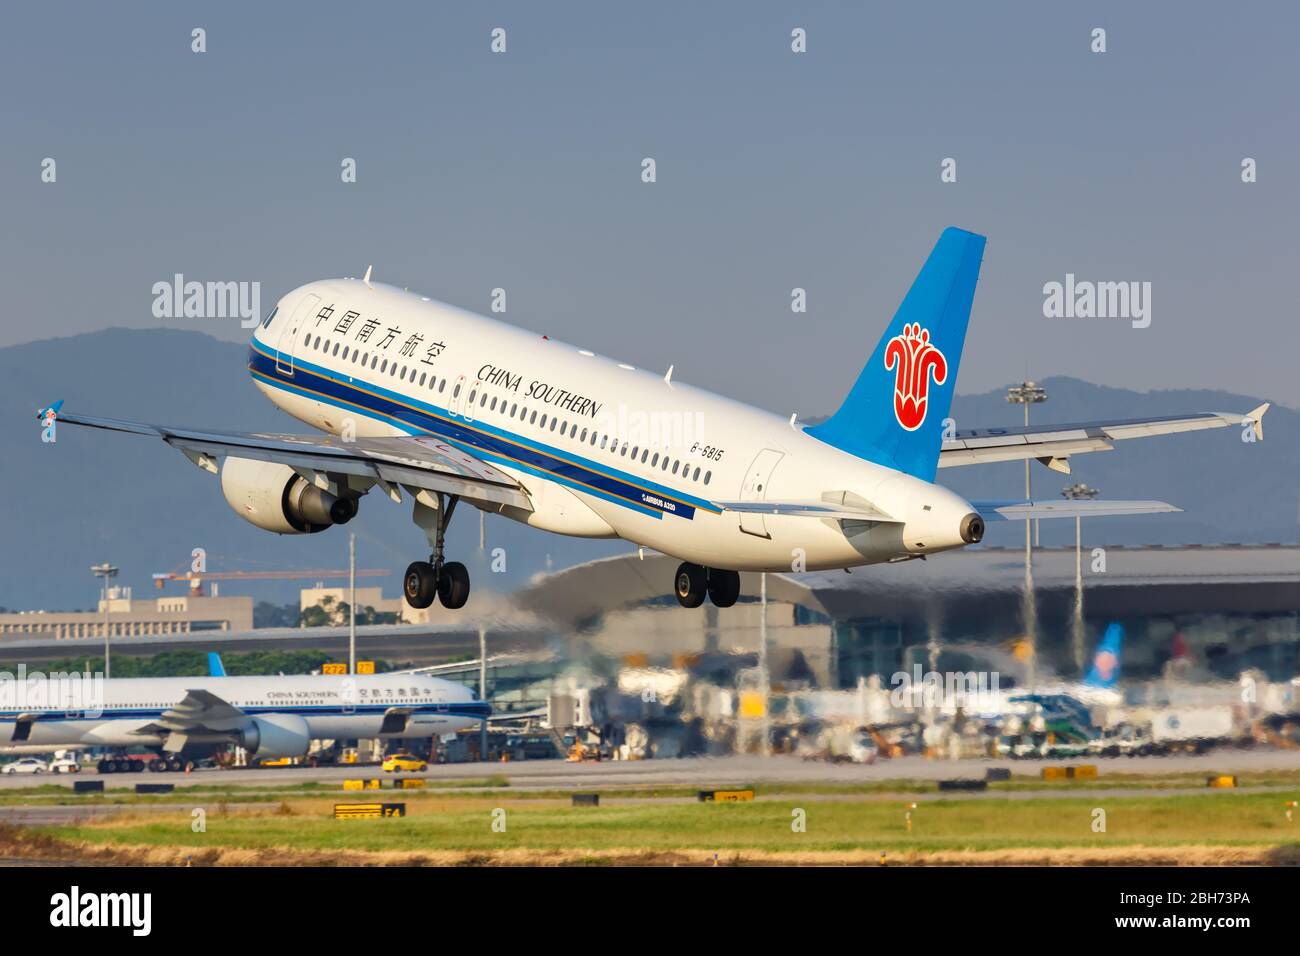 Guangzhou, China – September 23, 2019: China Southern Airlines Airbus A320 airplane at Guangzhou airport (CAN) in China. Stock Photo